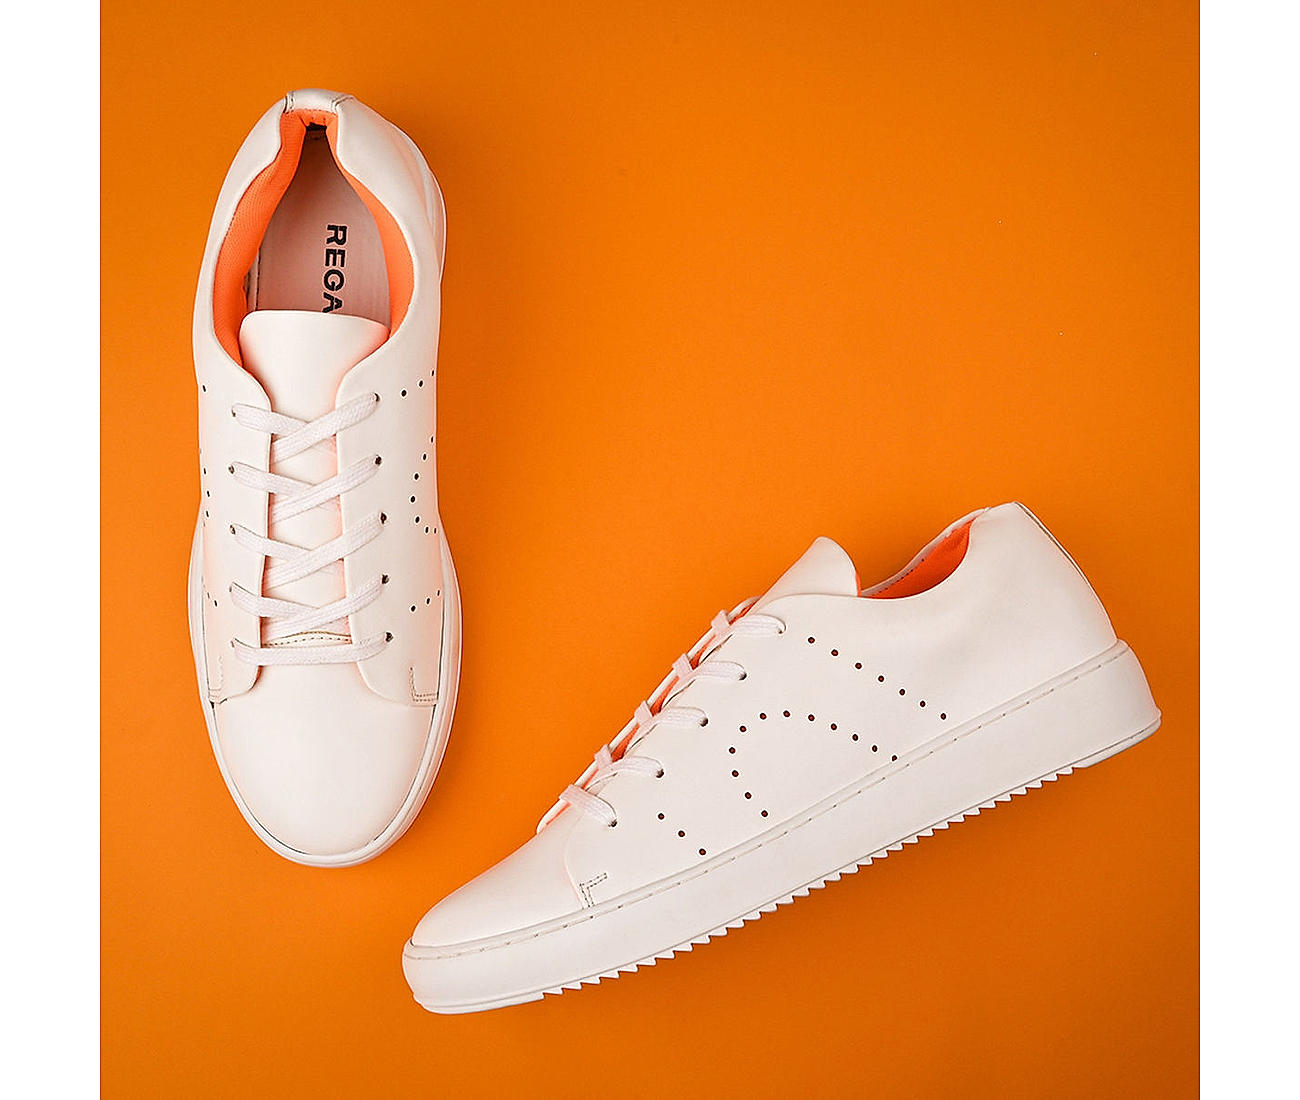 WHITE HIGH TOPS CASUAL SHOES FOR MEN & BOYS High Tops For Men Price in  India - Buy WHITE HIGH TOPS CASUAL SHOES FOR MEN & BOYS High Tops For Men  online